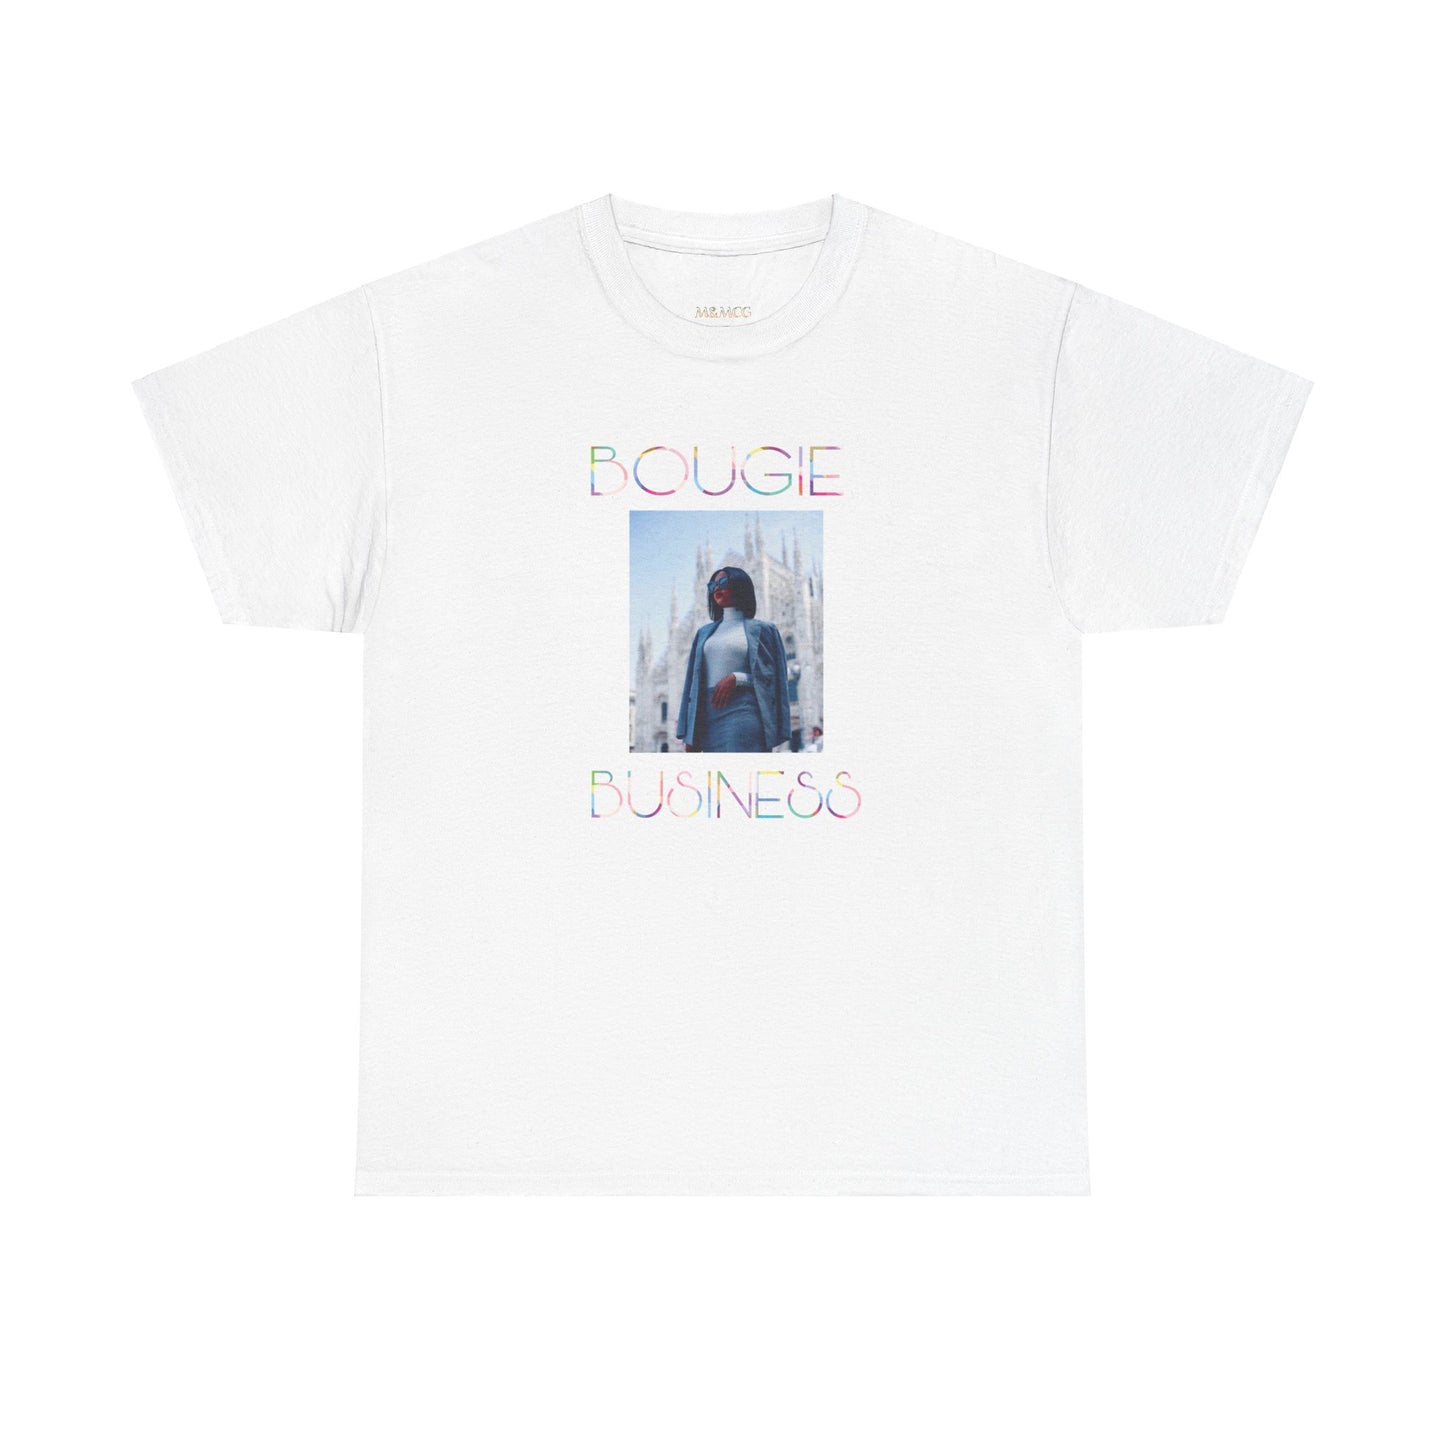 Bougie Business Tee (Classic)